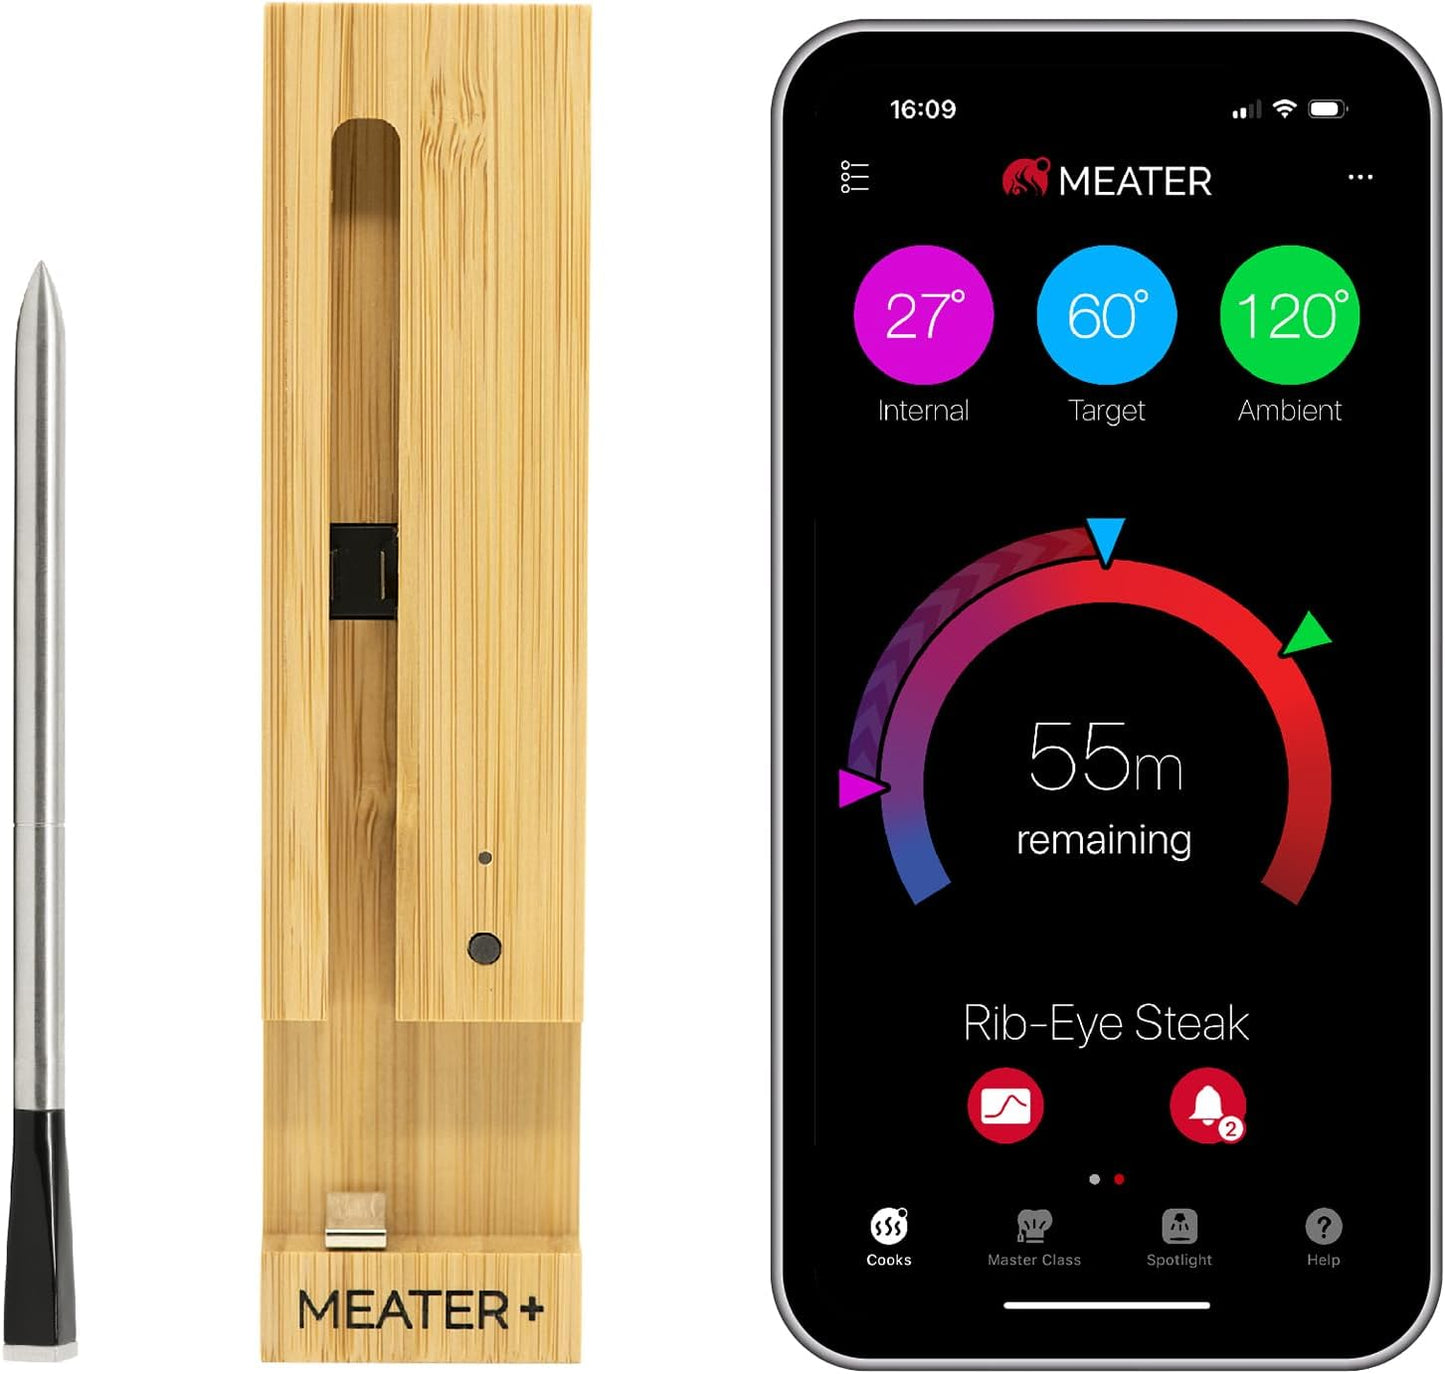 MEATER Plus Long Range Wireless Smart Meat Thermometer